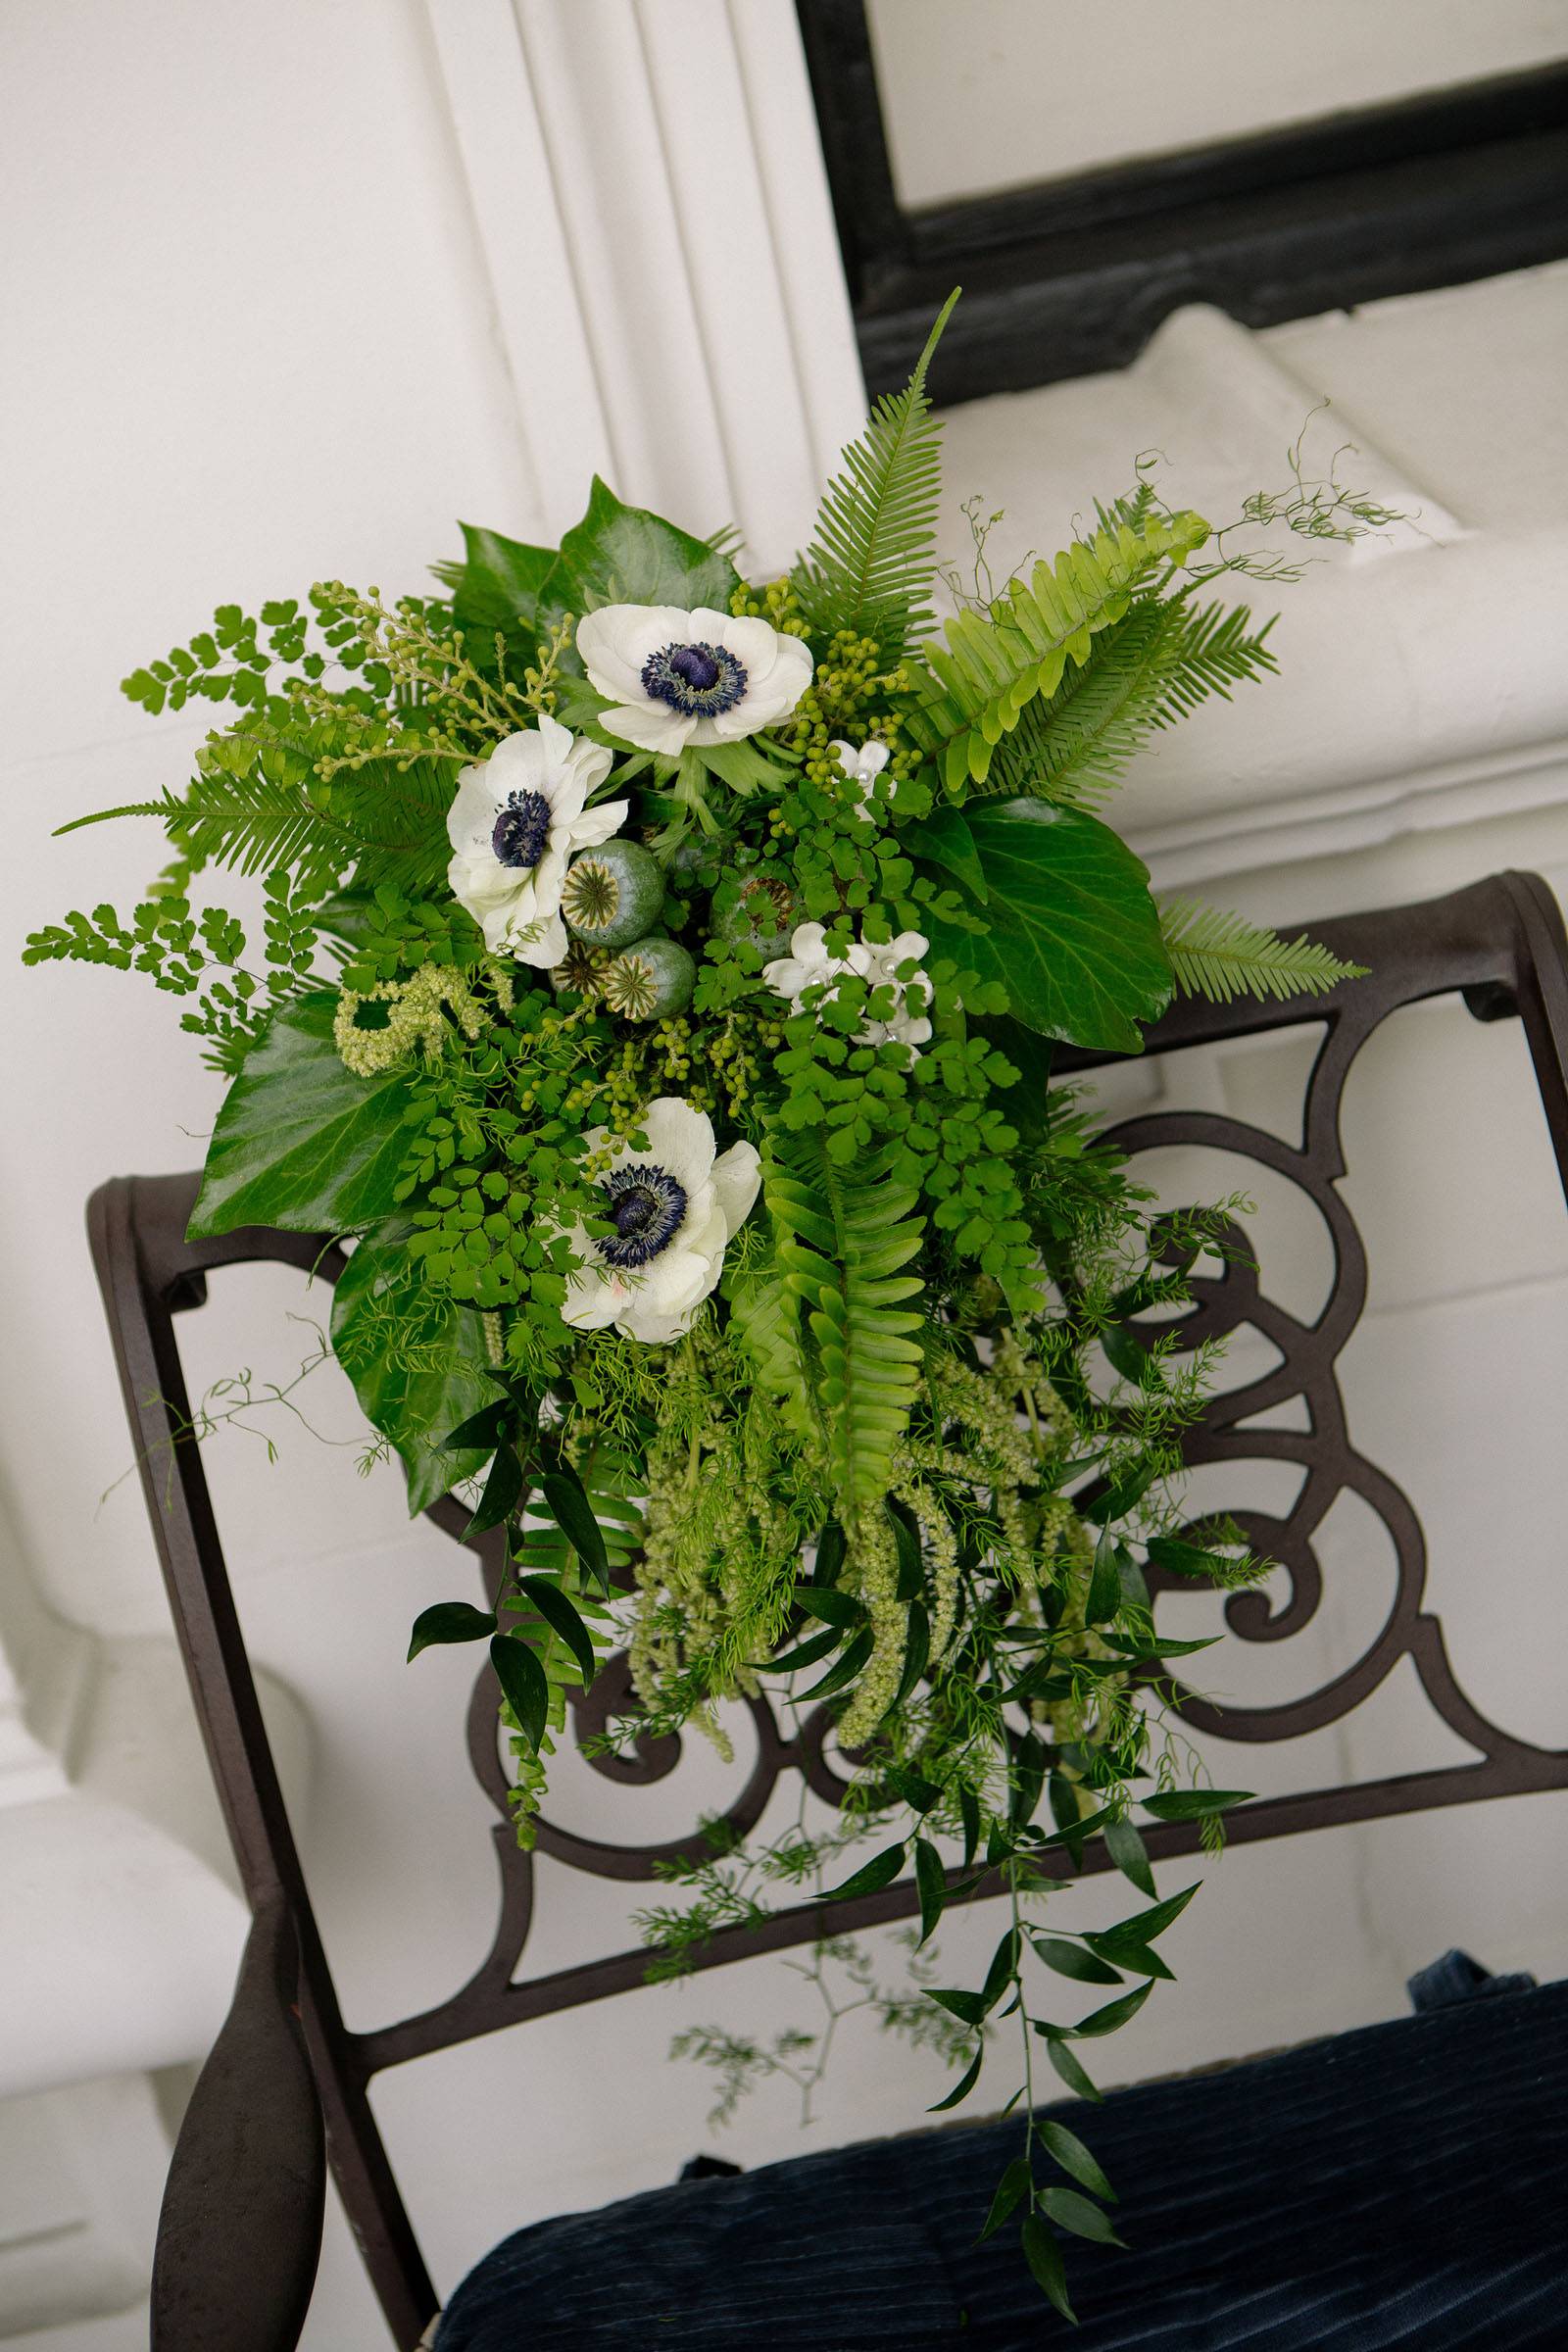 lush green bridal bouquet of ferns, greenery and anemones